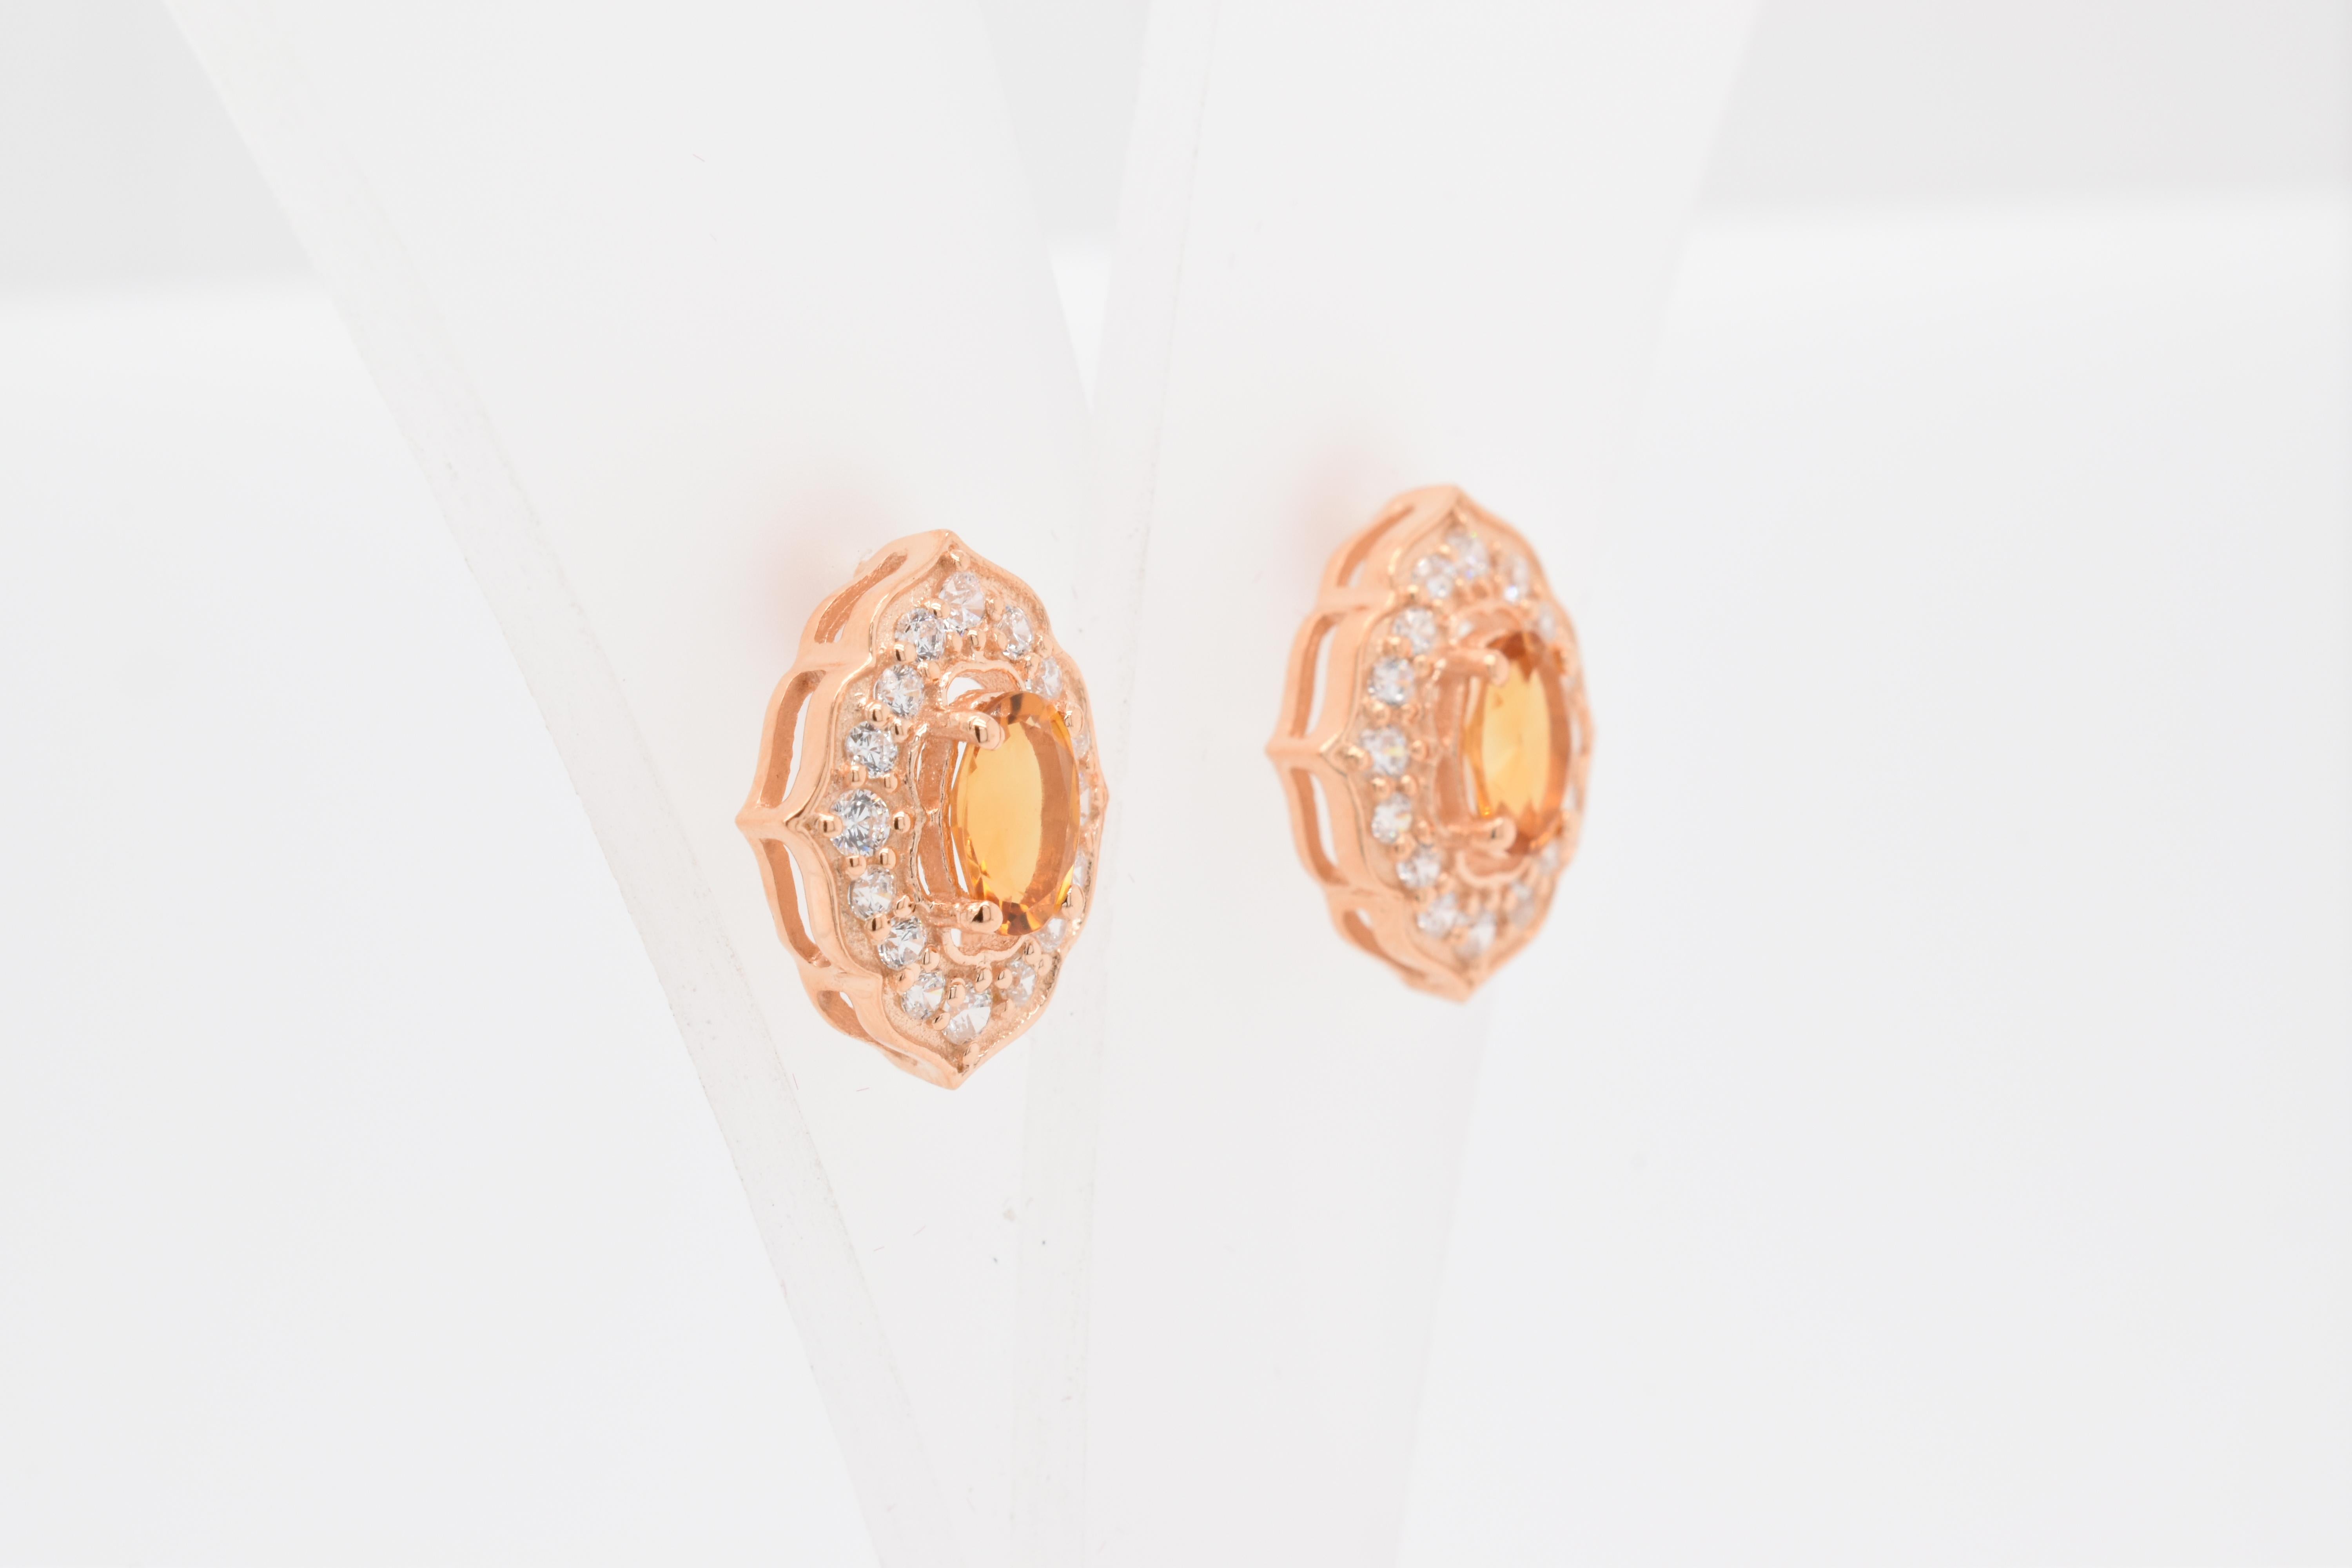 Oval Shape Citrine Gemstone And CZ beautifully crafted  in a Earrings. A fiery Yellow Color November Birthstone. For a special occasion like Engagement or Proposal or may be as a gift for a special person.

Primary Stone Size - 6x4 mm